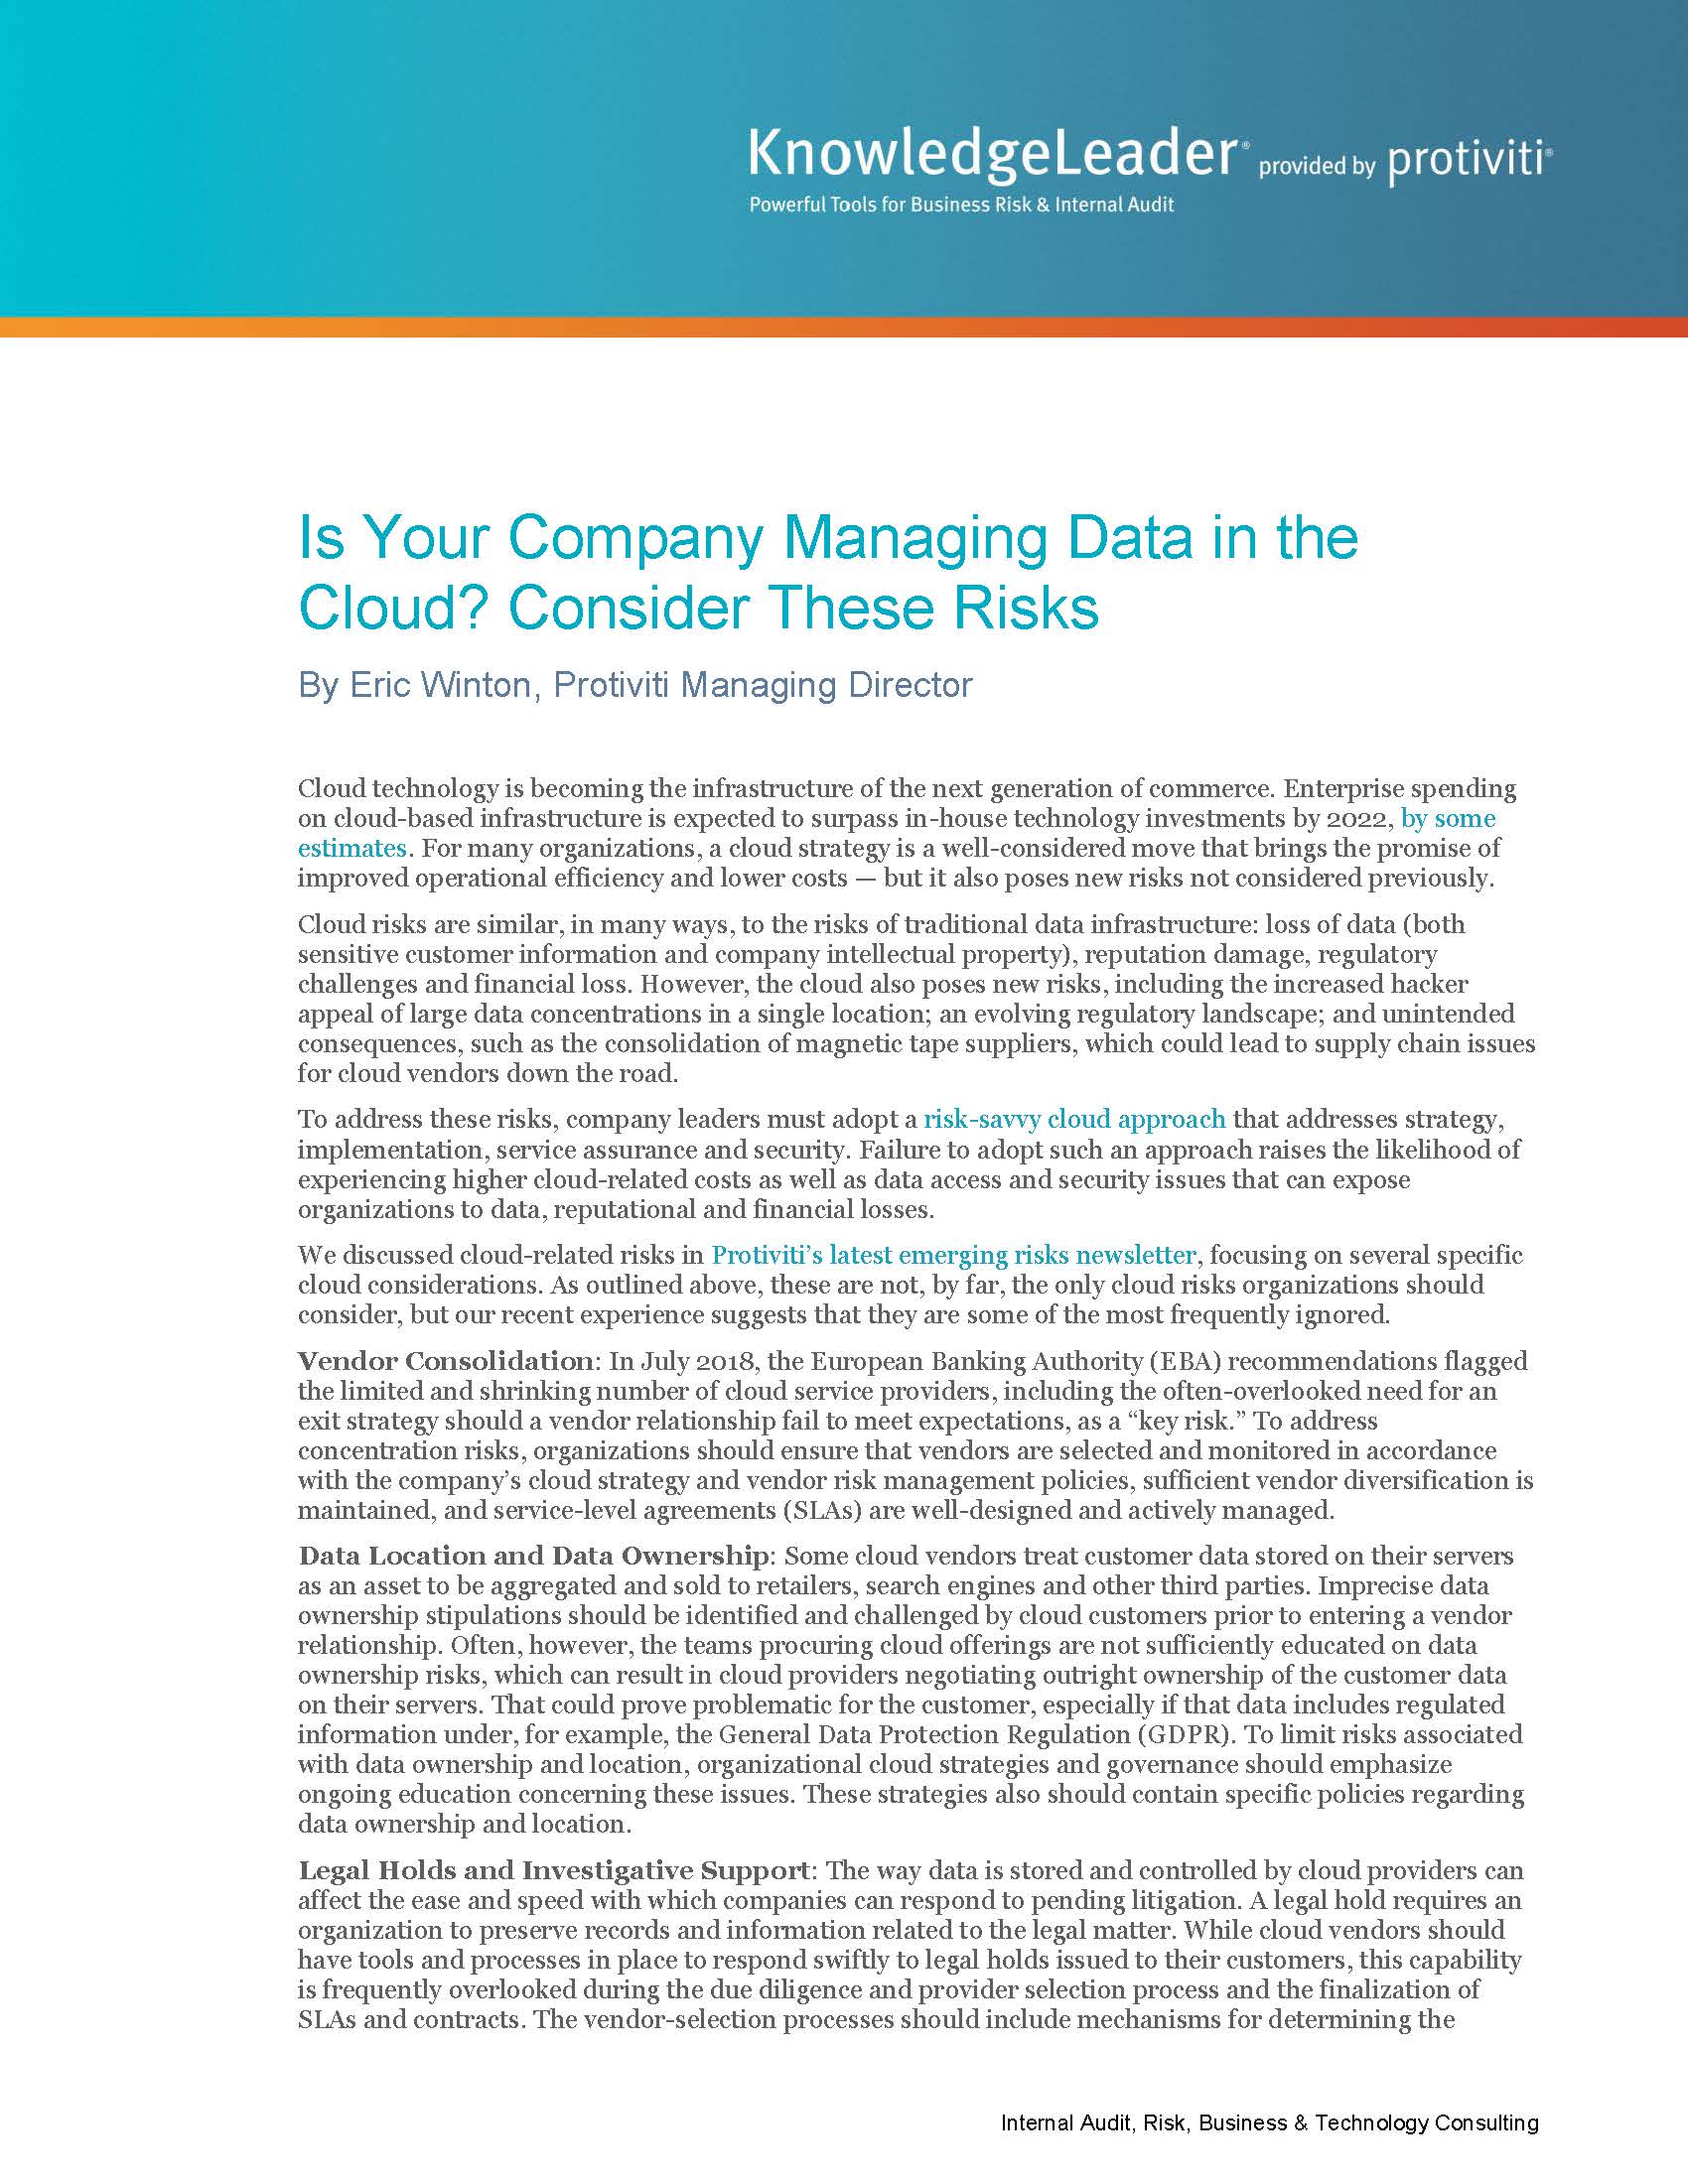 Screenshot of the first page of Is Your Company Managing Data in the Cloud Consider These Risks